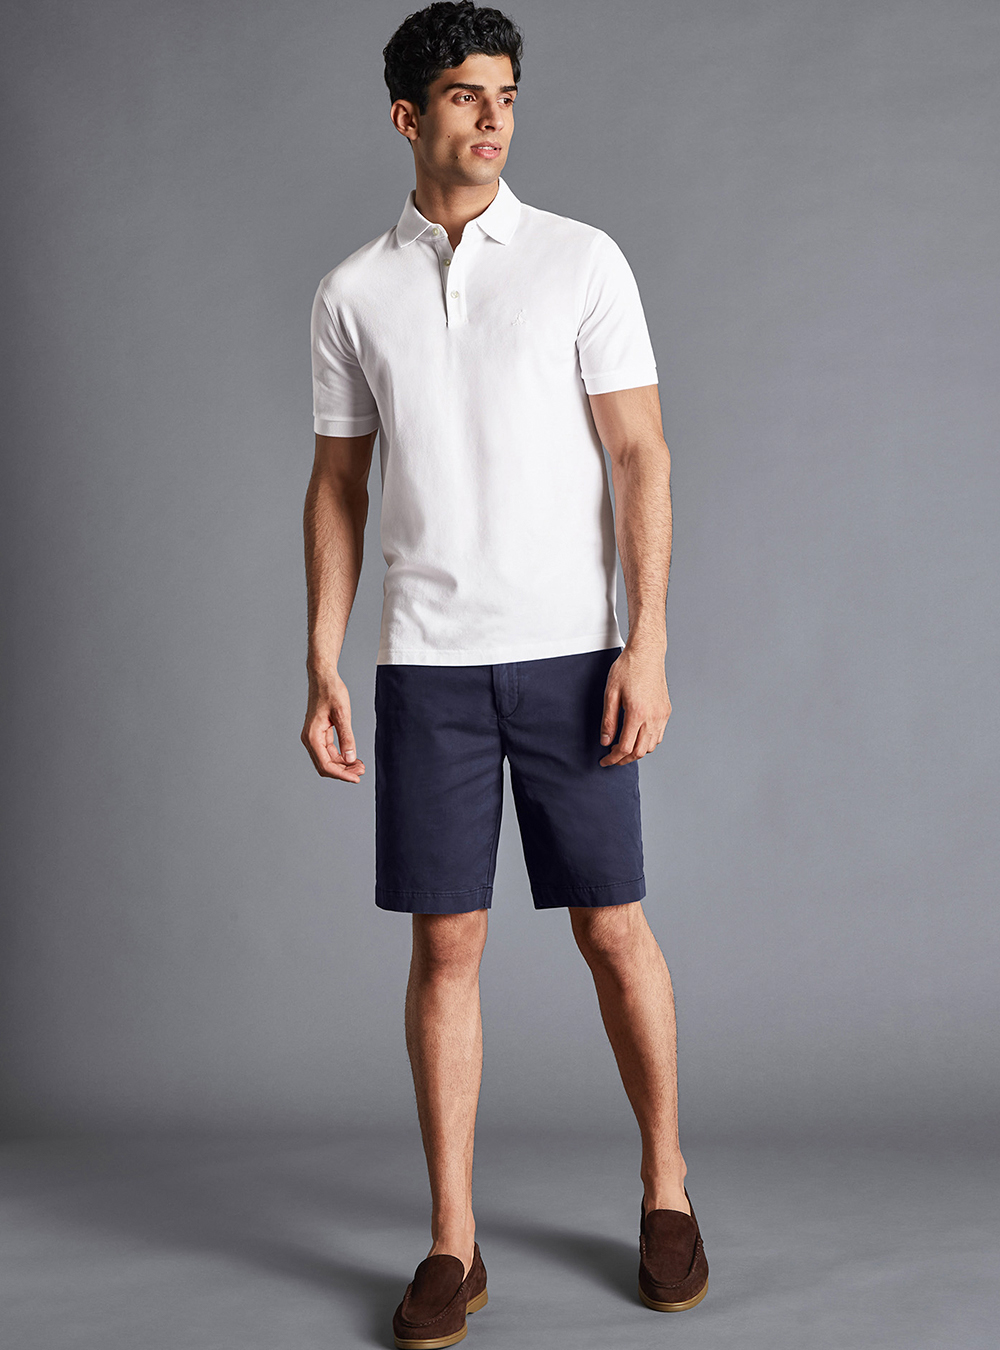 white polo t-shirt, navy dress shorts, and brown suede loafers